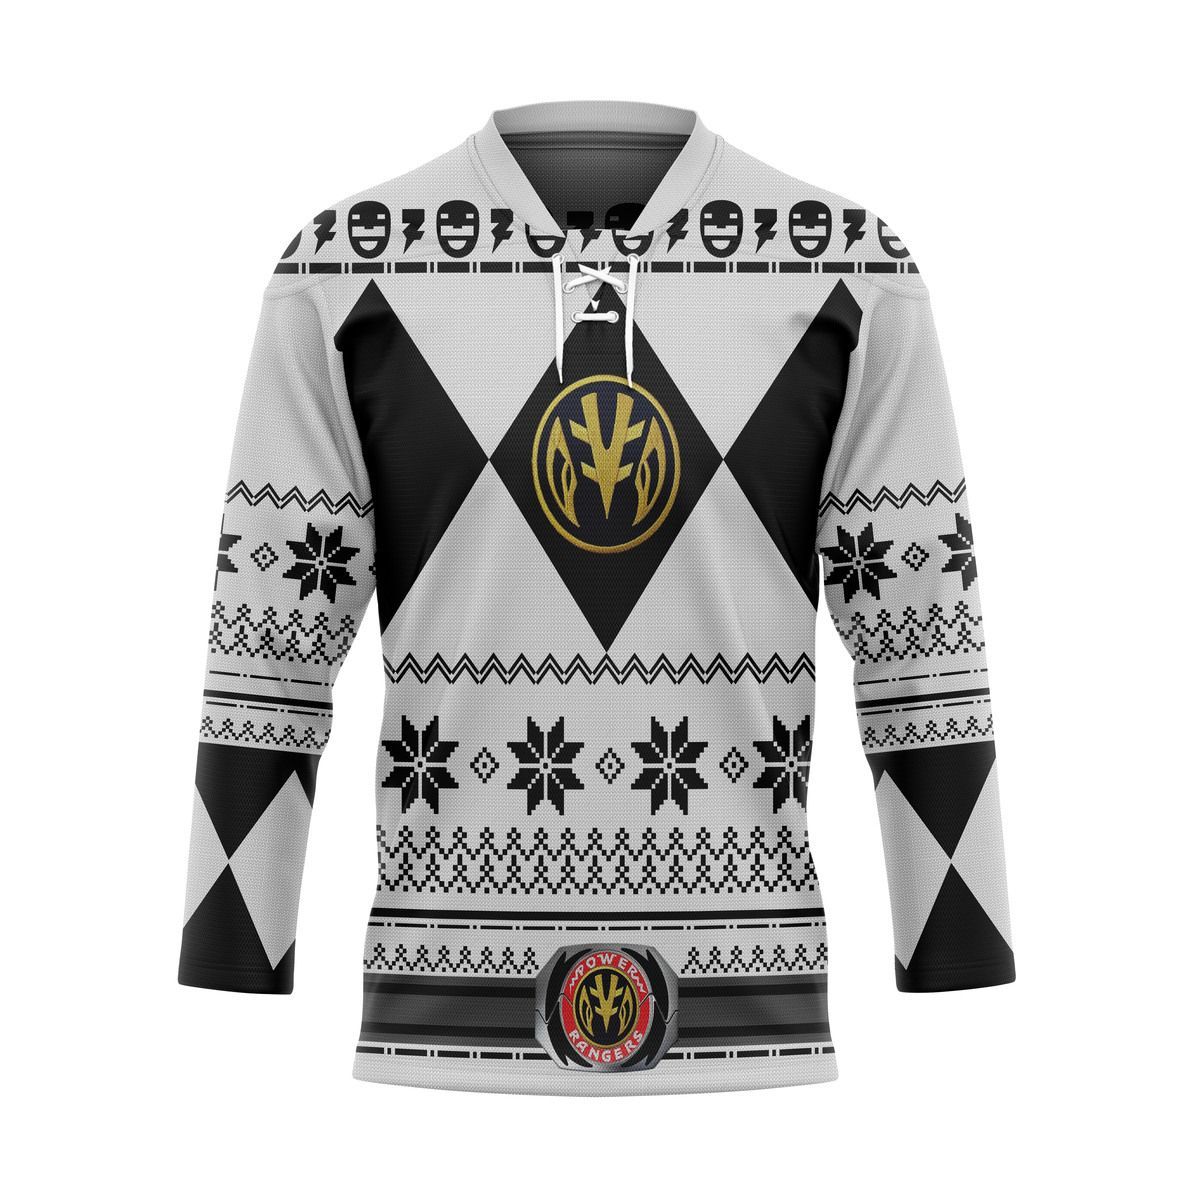 Check out our collection of unique and stylish hockey jerseys from all over the world 150